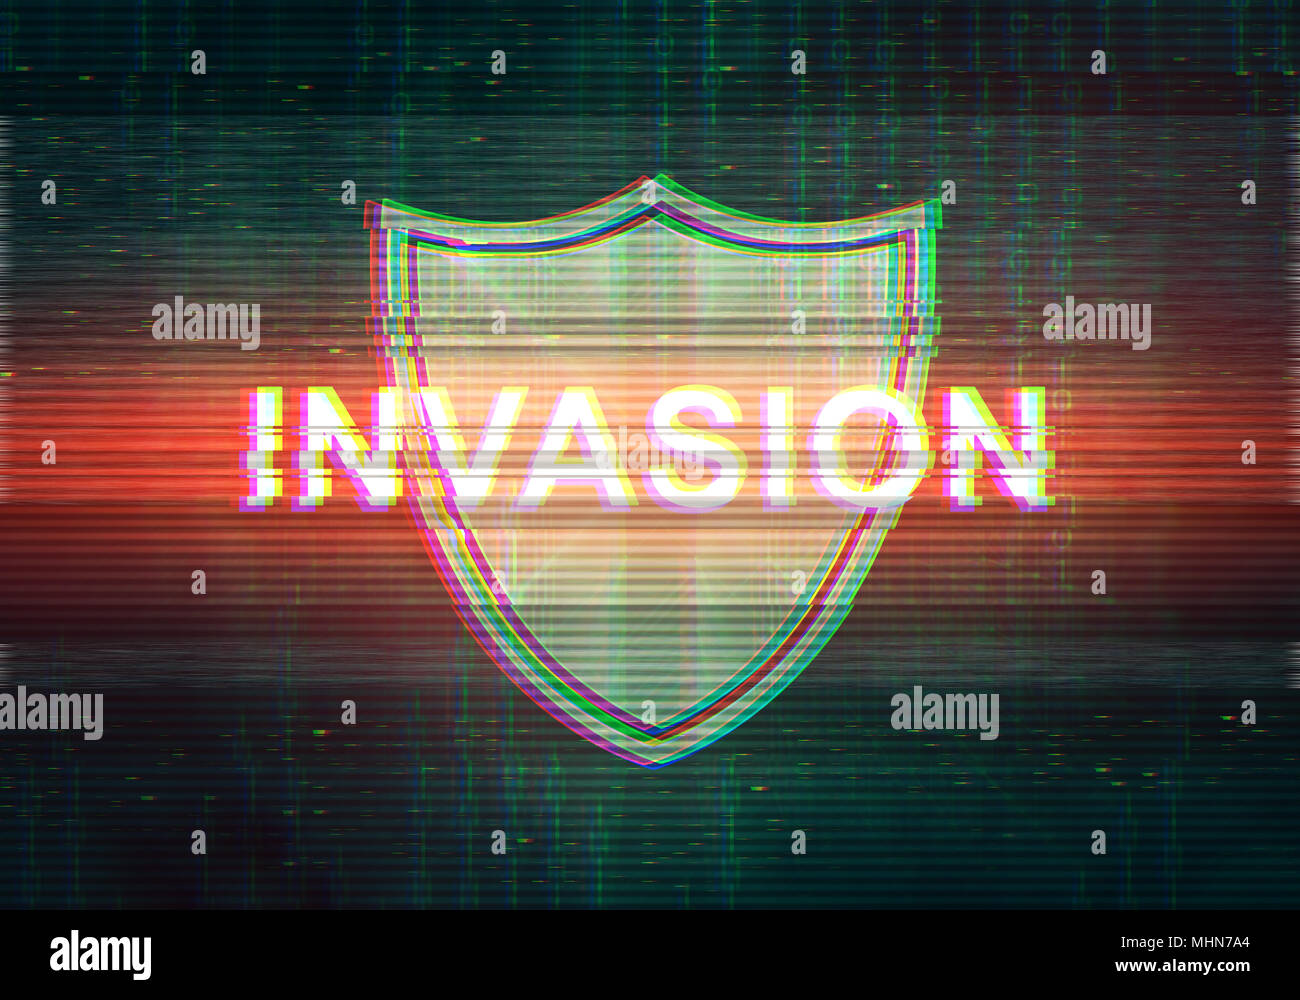 Abstract illustration of distorted display screen with red light spot and shield icon. Attacked inscription in technology interface. Glitch effect bac Stock Photo